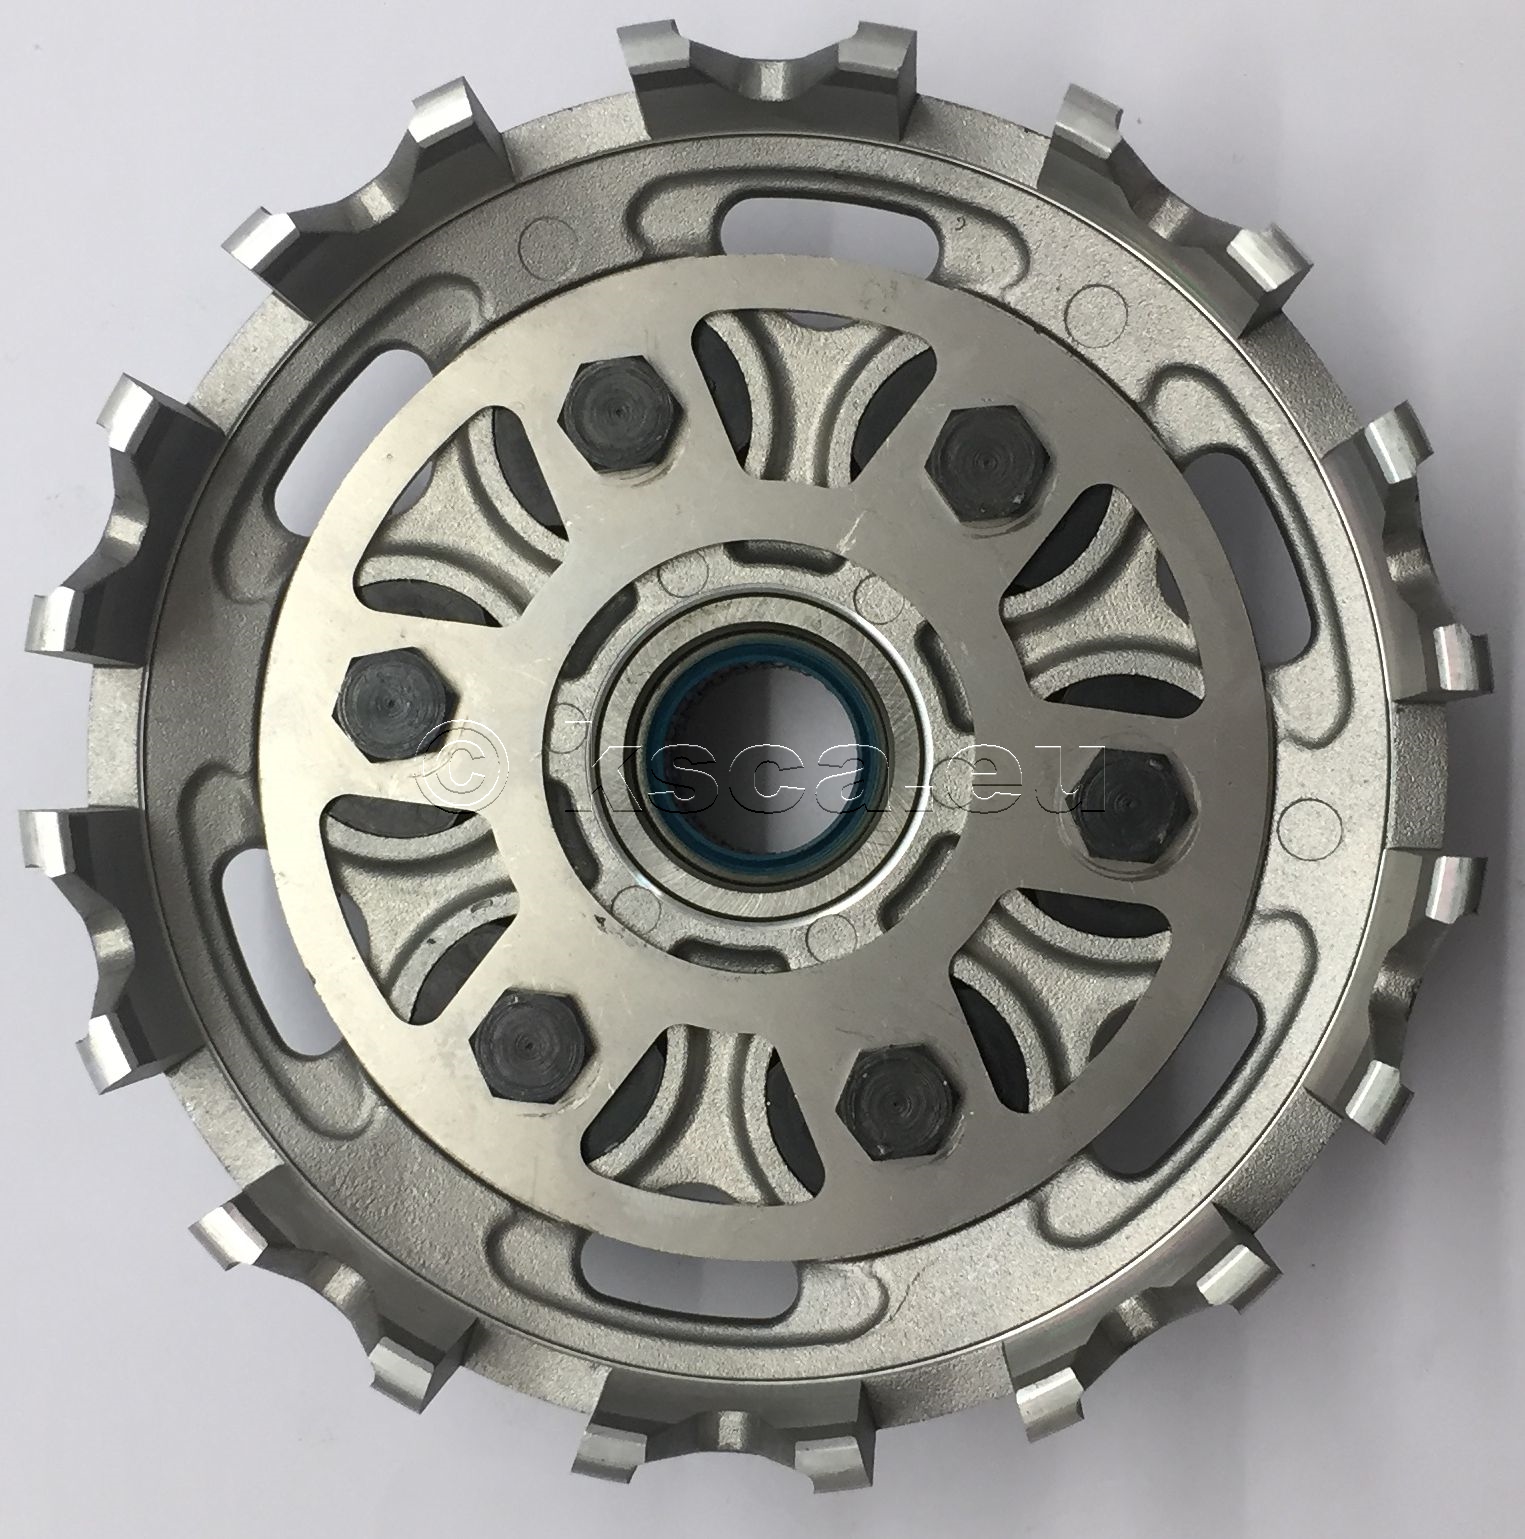 Picture of TM primary clutch complete KZ10 B / C R1